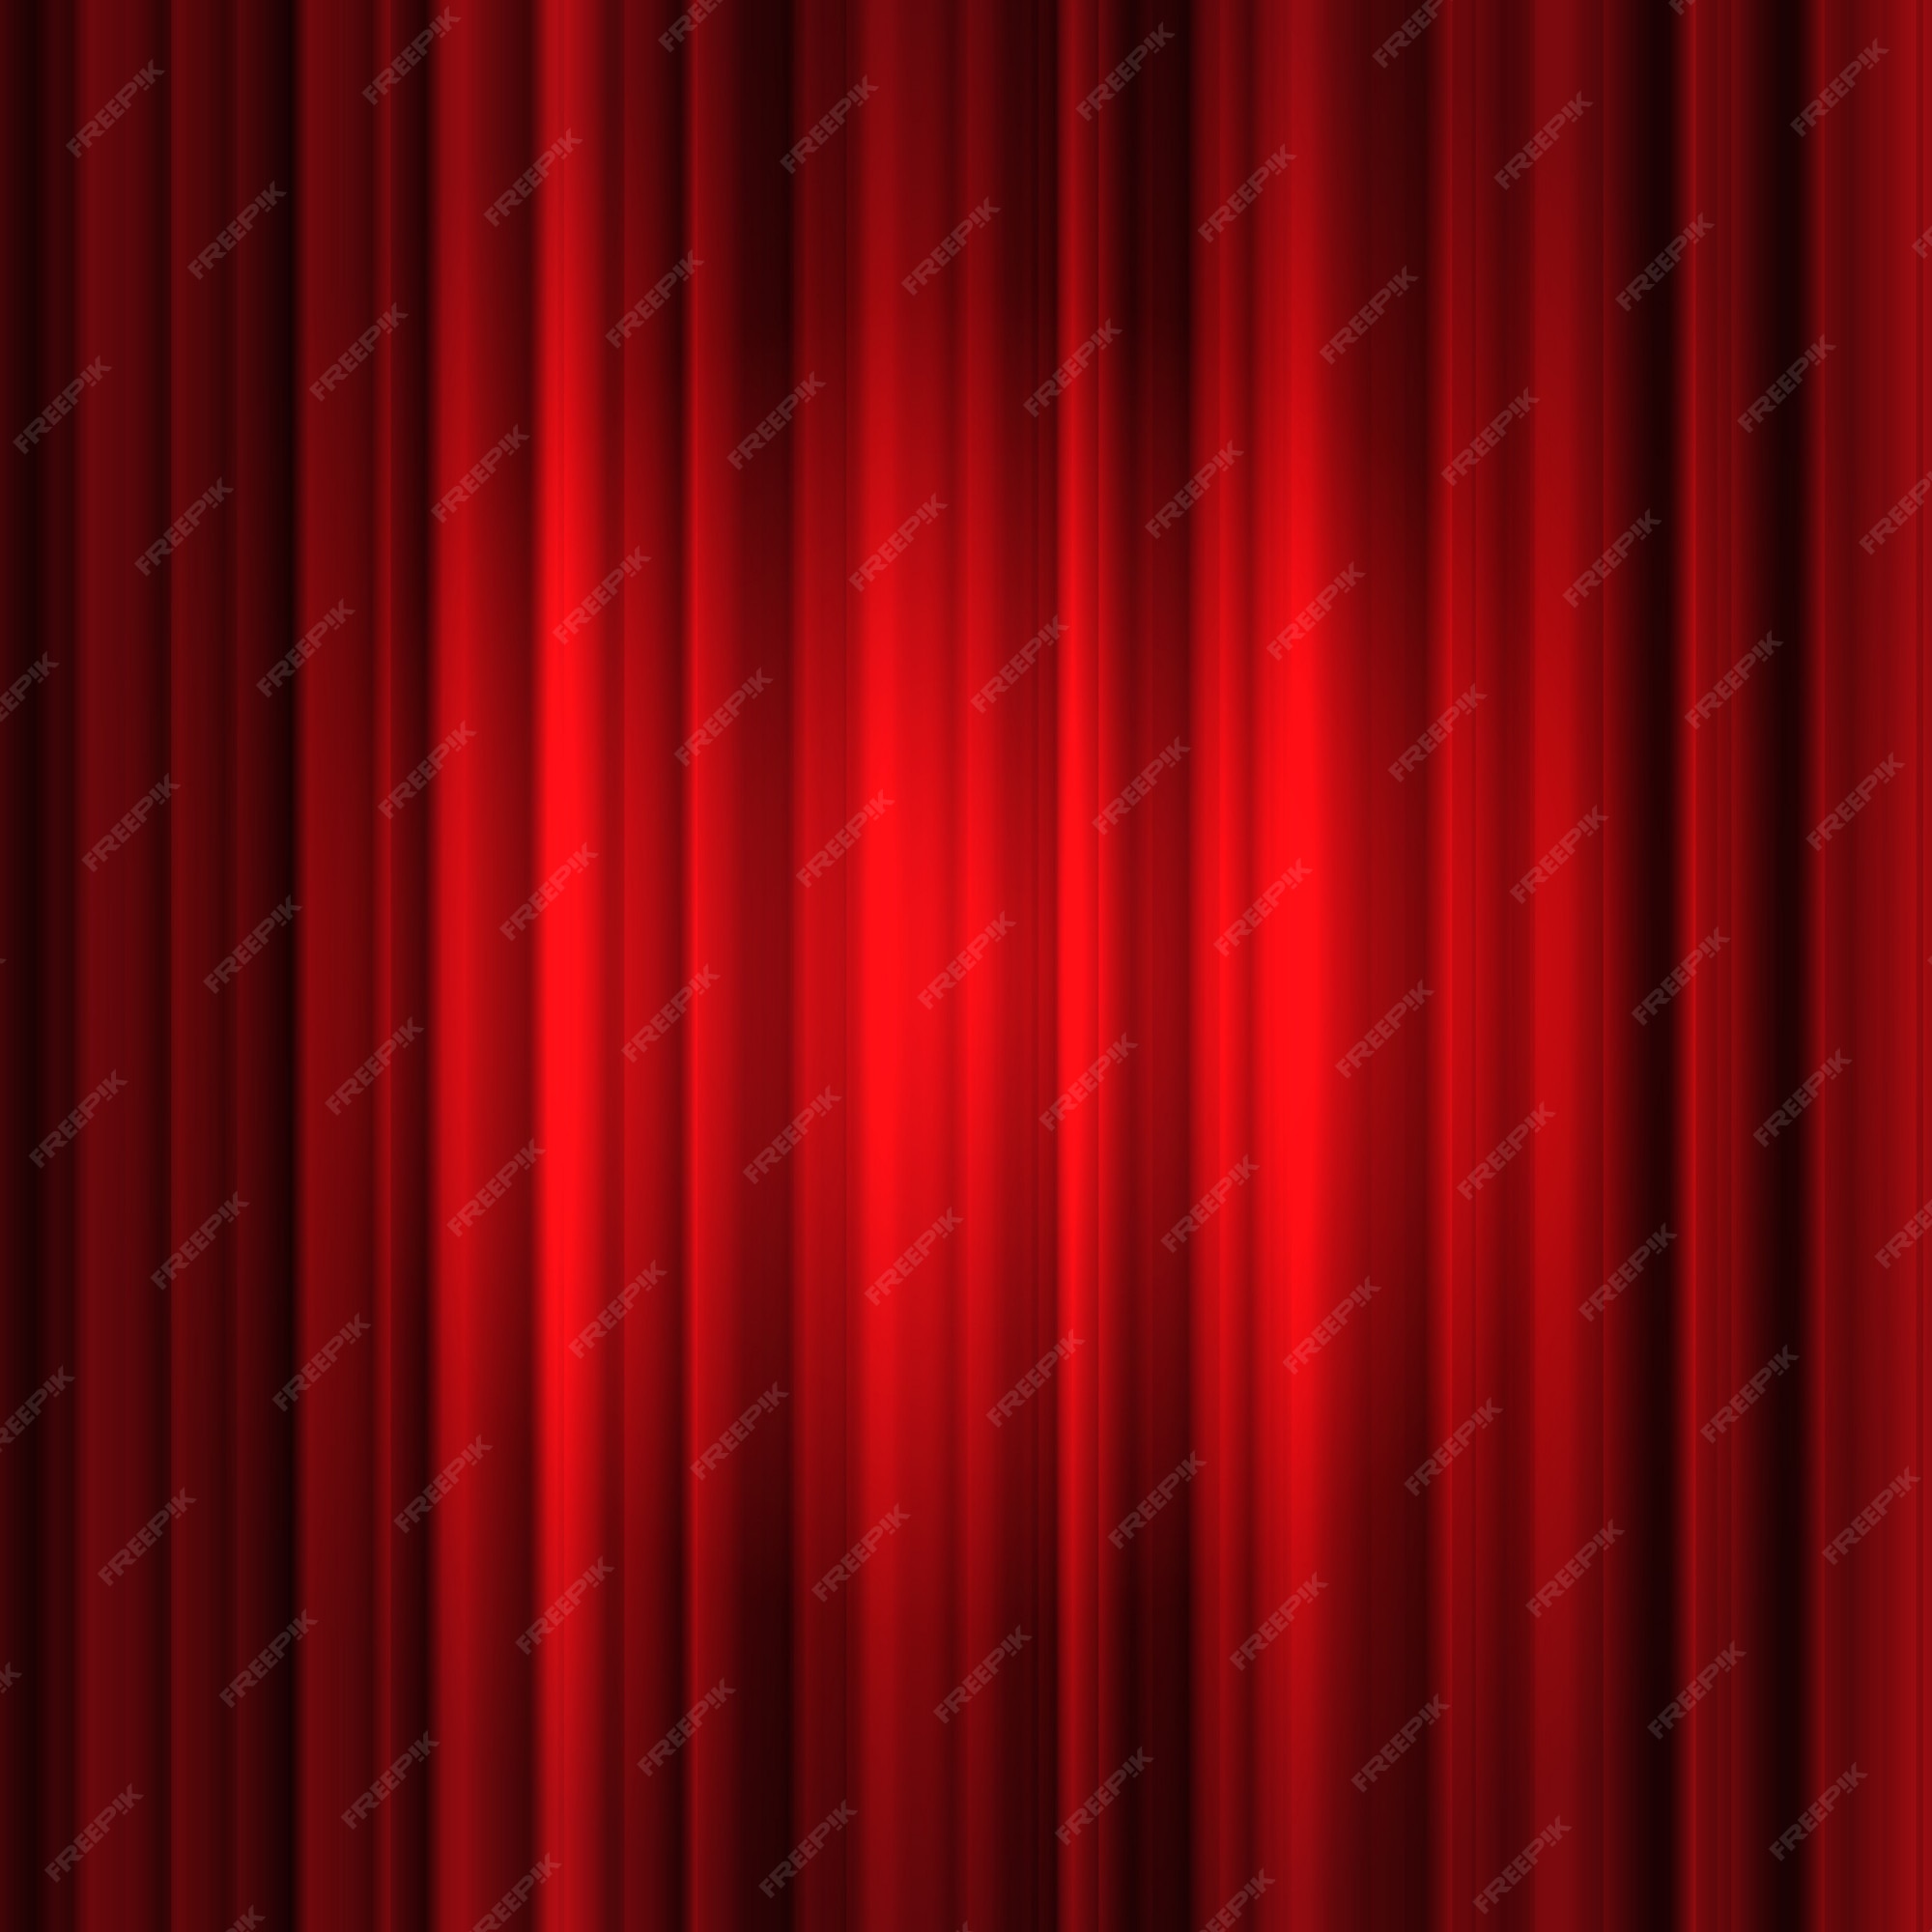 Red Curtain Background Images - Free Download on Freepik